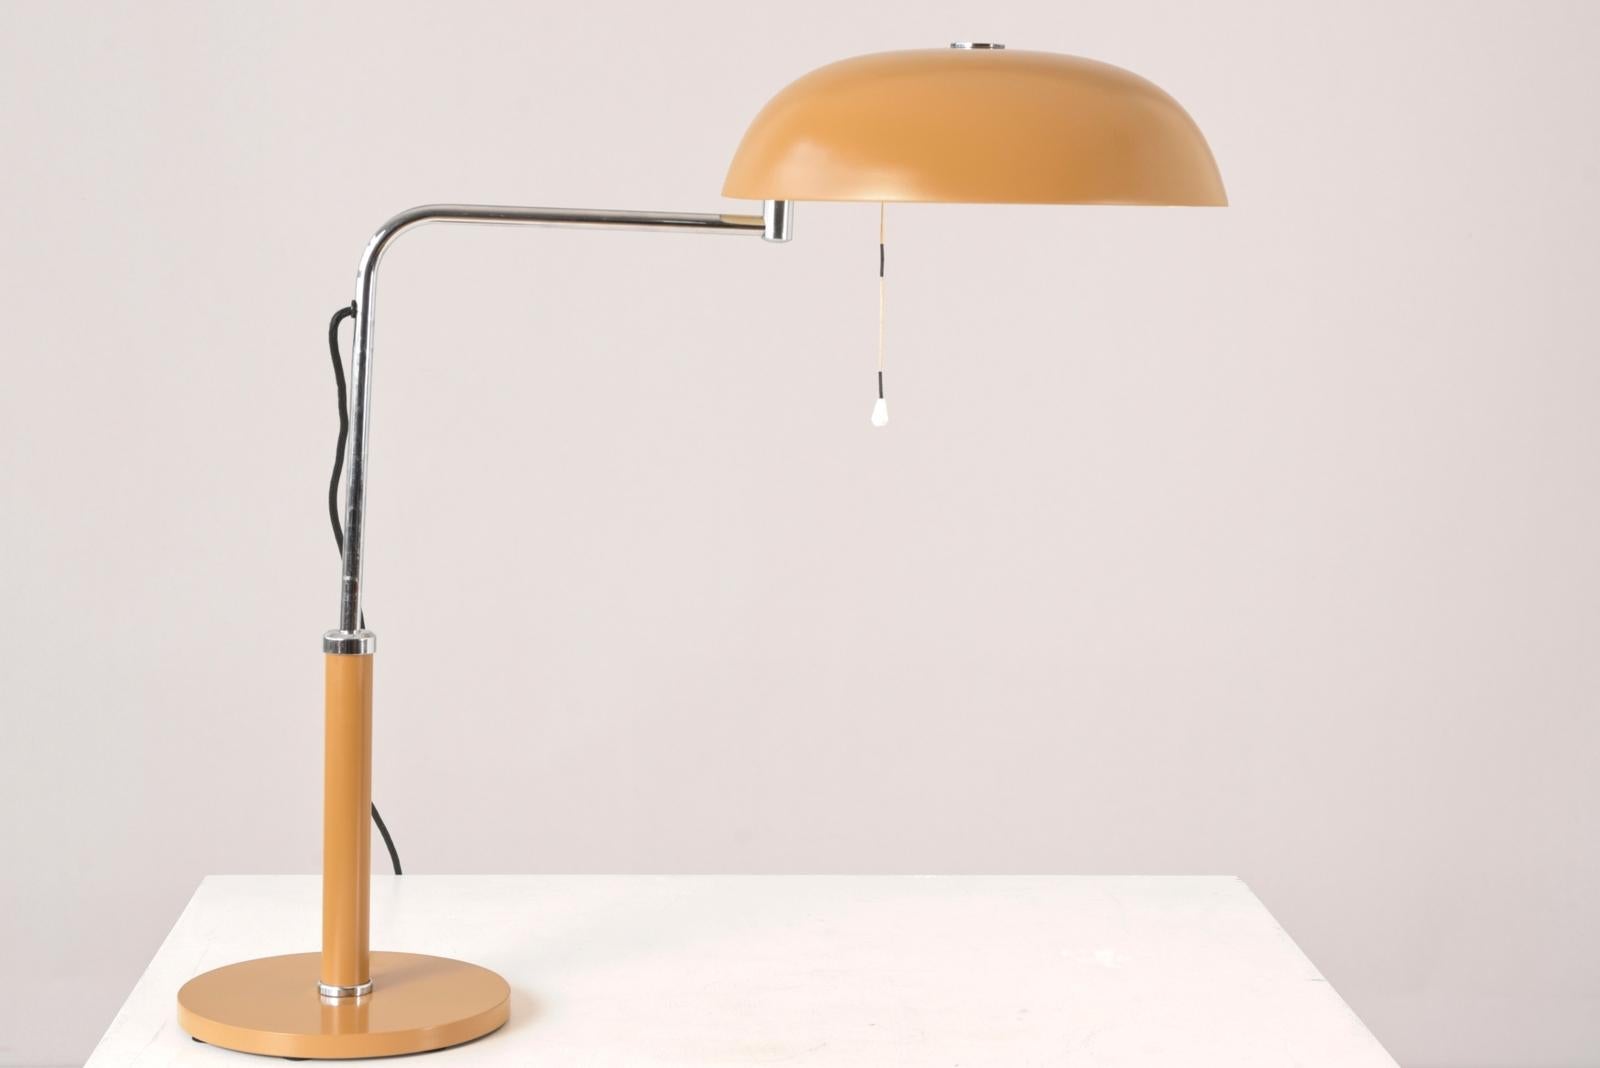 Swiss Table Lamp Quick 1500 by Alfred Müller for Amba, Switzerland - 1959 For Sale